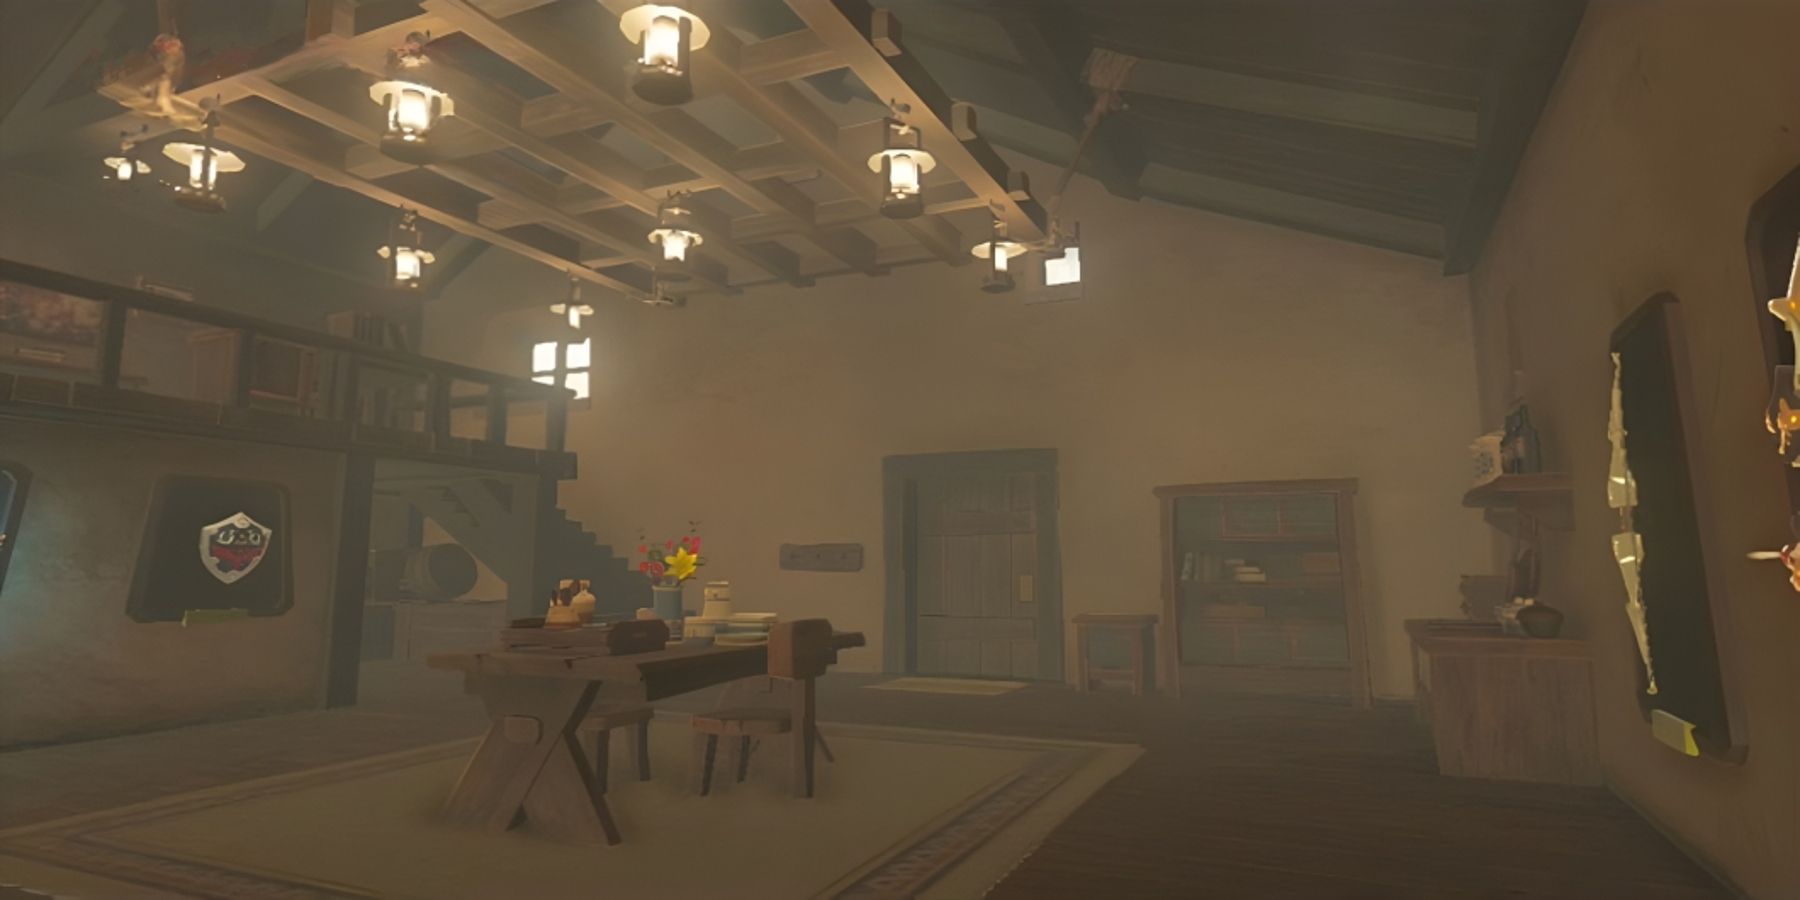 Link's house interior from Zelda: Breath of the Wild